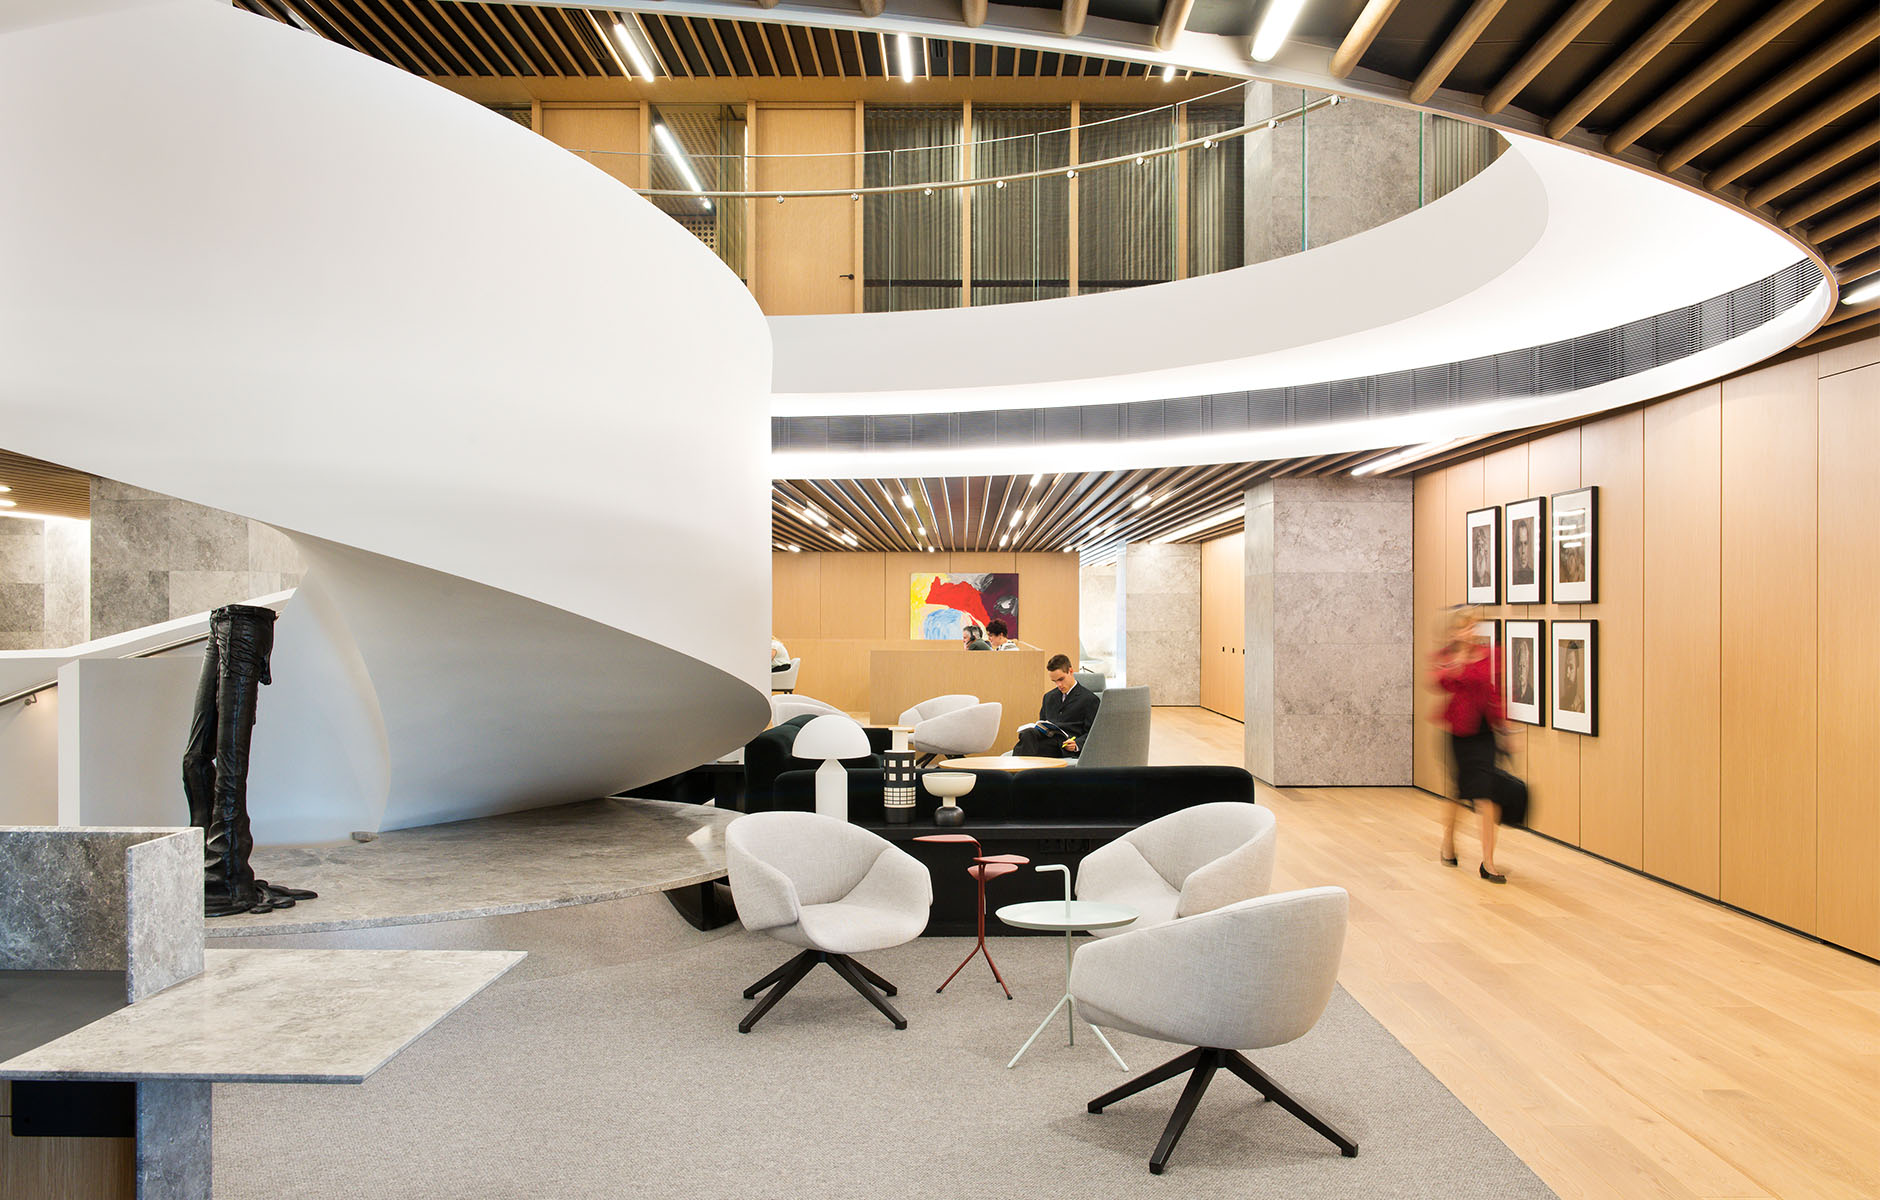 The interior of Deakin University designed by Hassell architects features the Anita Armchair designed by Metrica. Photo c/o Hassell. 